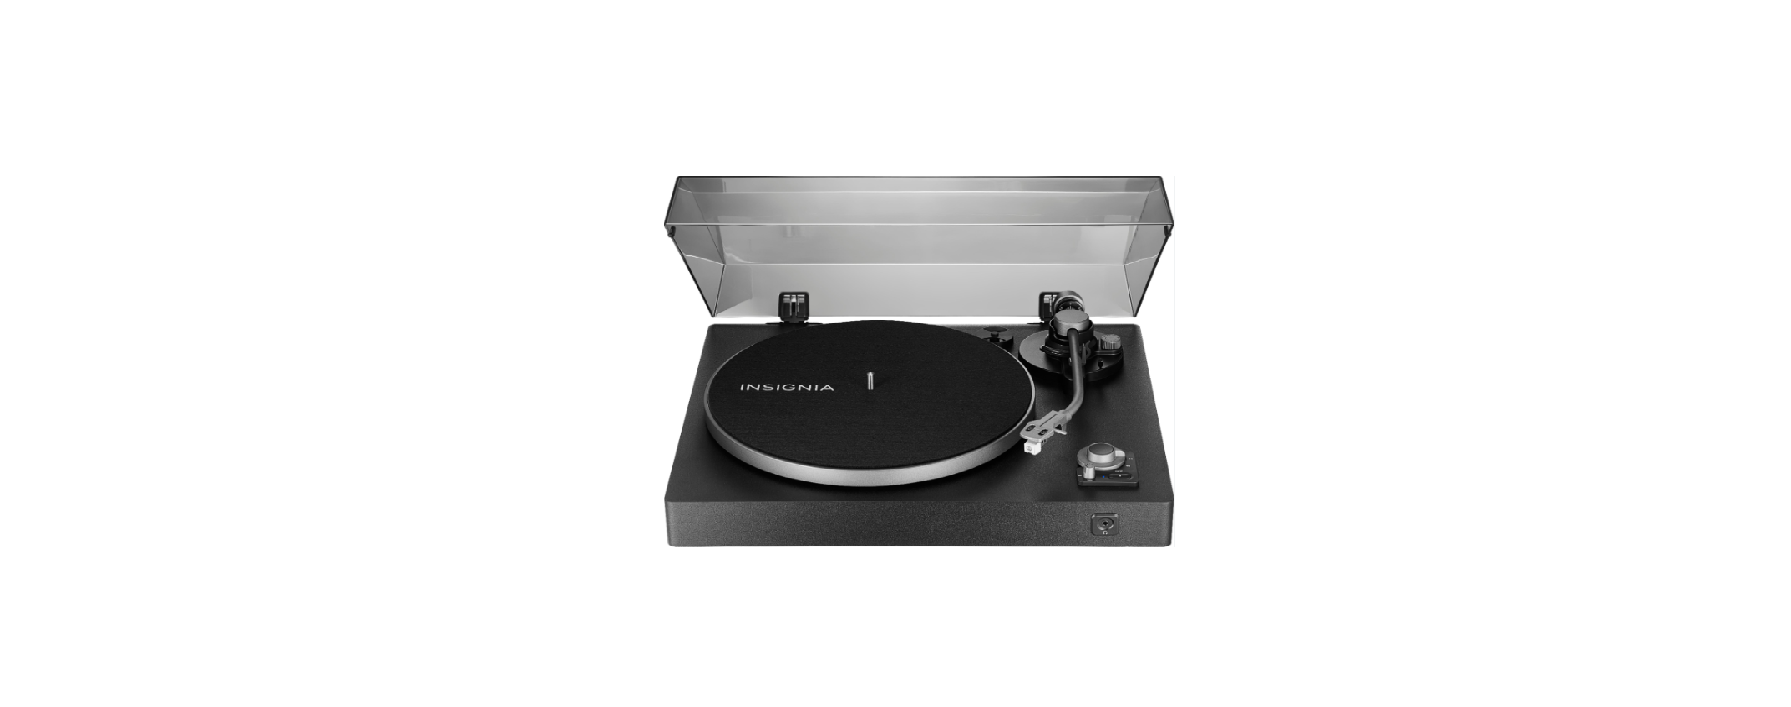 You are currently viewing Insignia NS-BTST21 Bluetooth Turntable User Manual